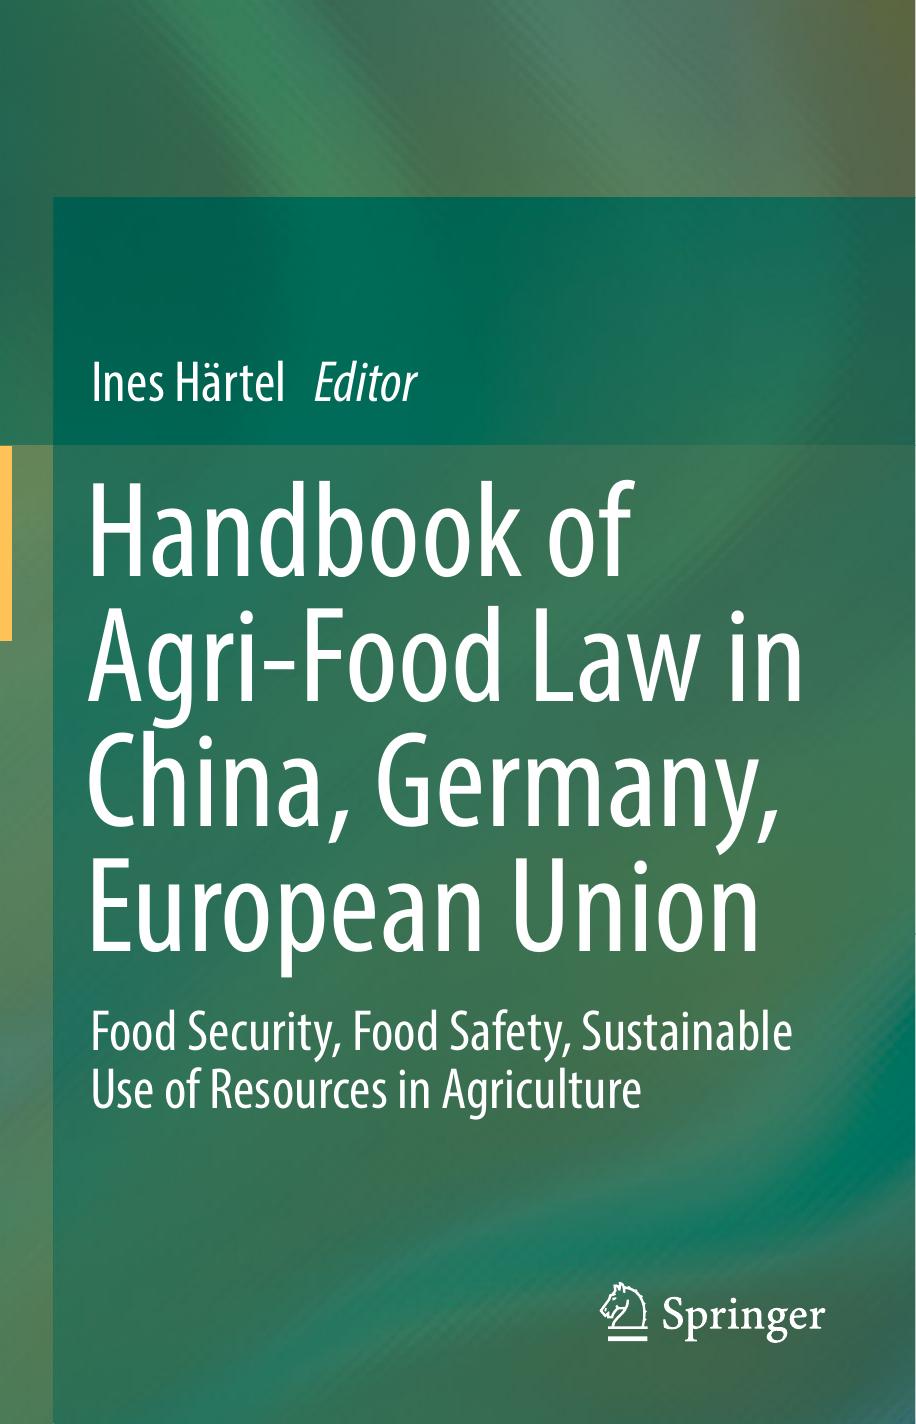 Handbook of Agri-Food Law in China, Germany, European Union Food Security, Food Safety, 2018